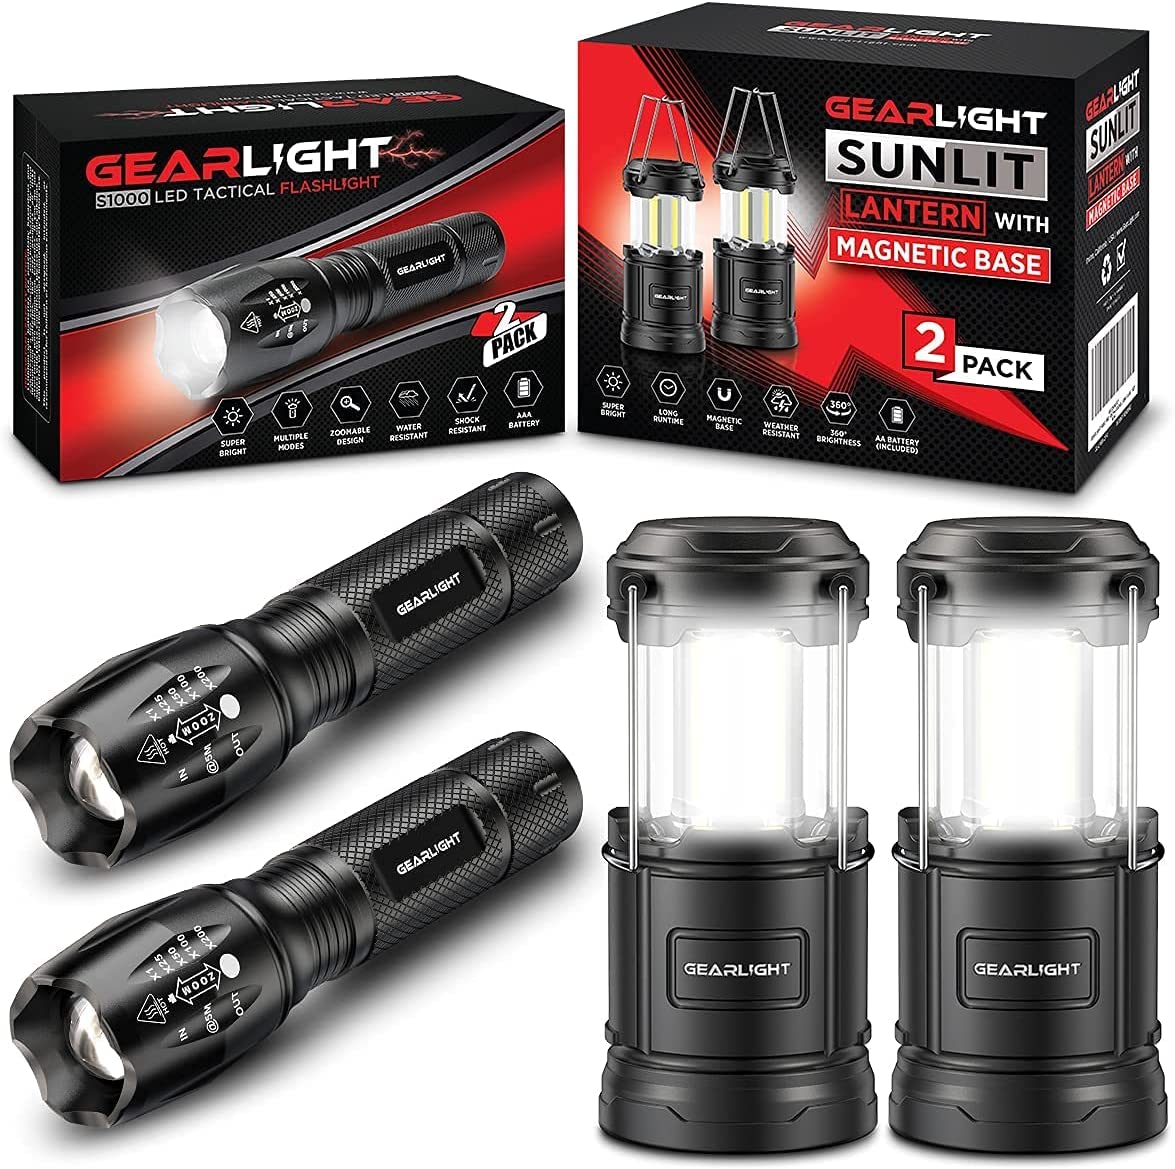 GearLight S1000 LED Tactical Flashlight with Holster [2 Pack] + GearLight Sunlit Lantern with Magnetic Base [2 Pack]